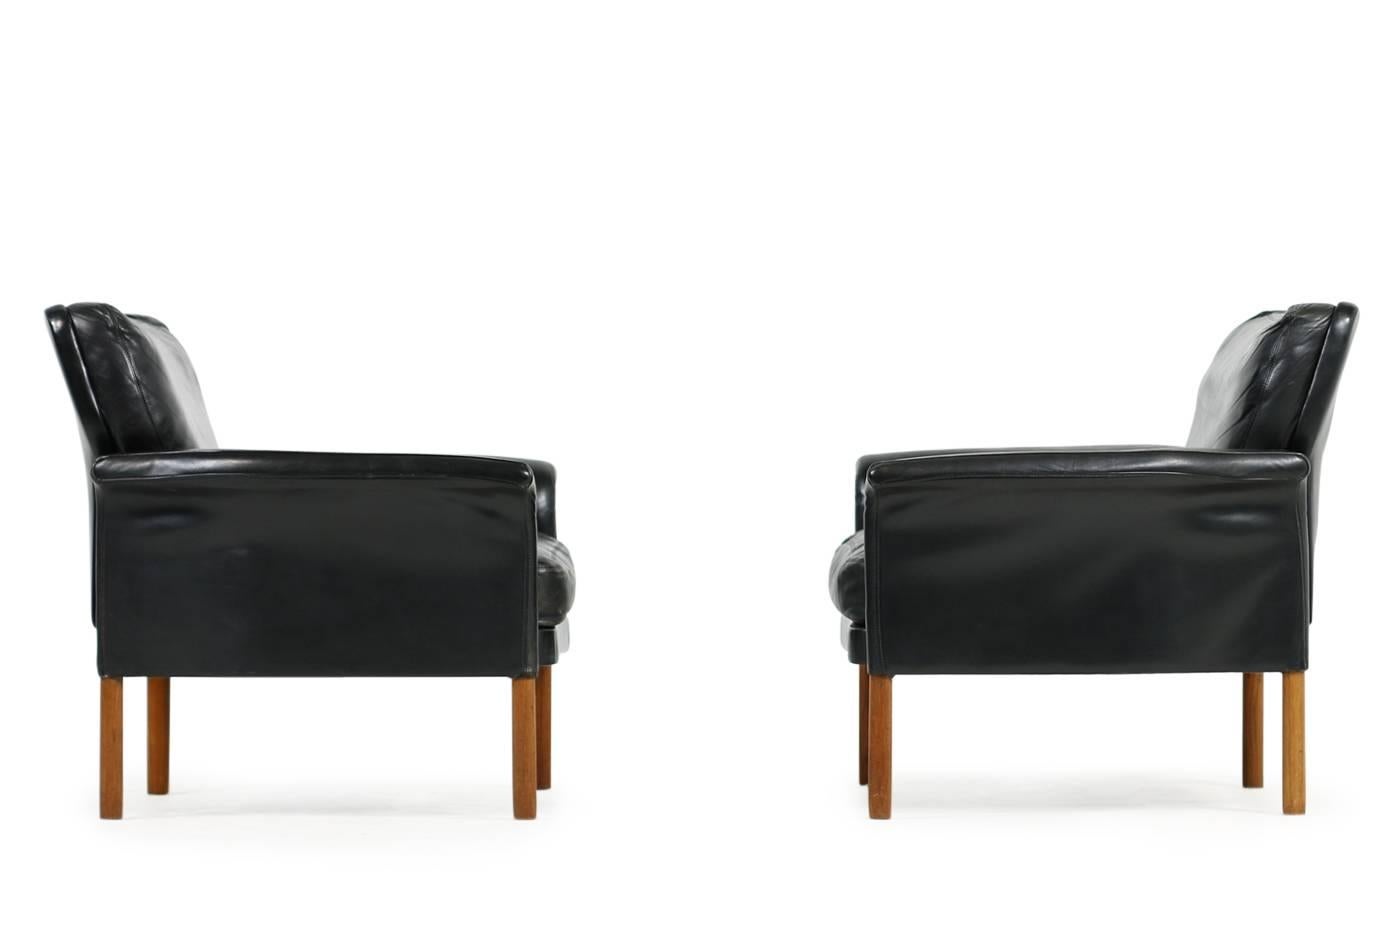 Mid-20th Century Pair of Leather and Teak Lounge Chairs with Down Filling Hans Olsen Attributed